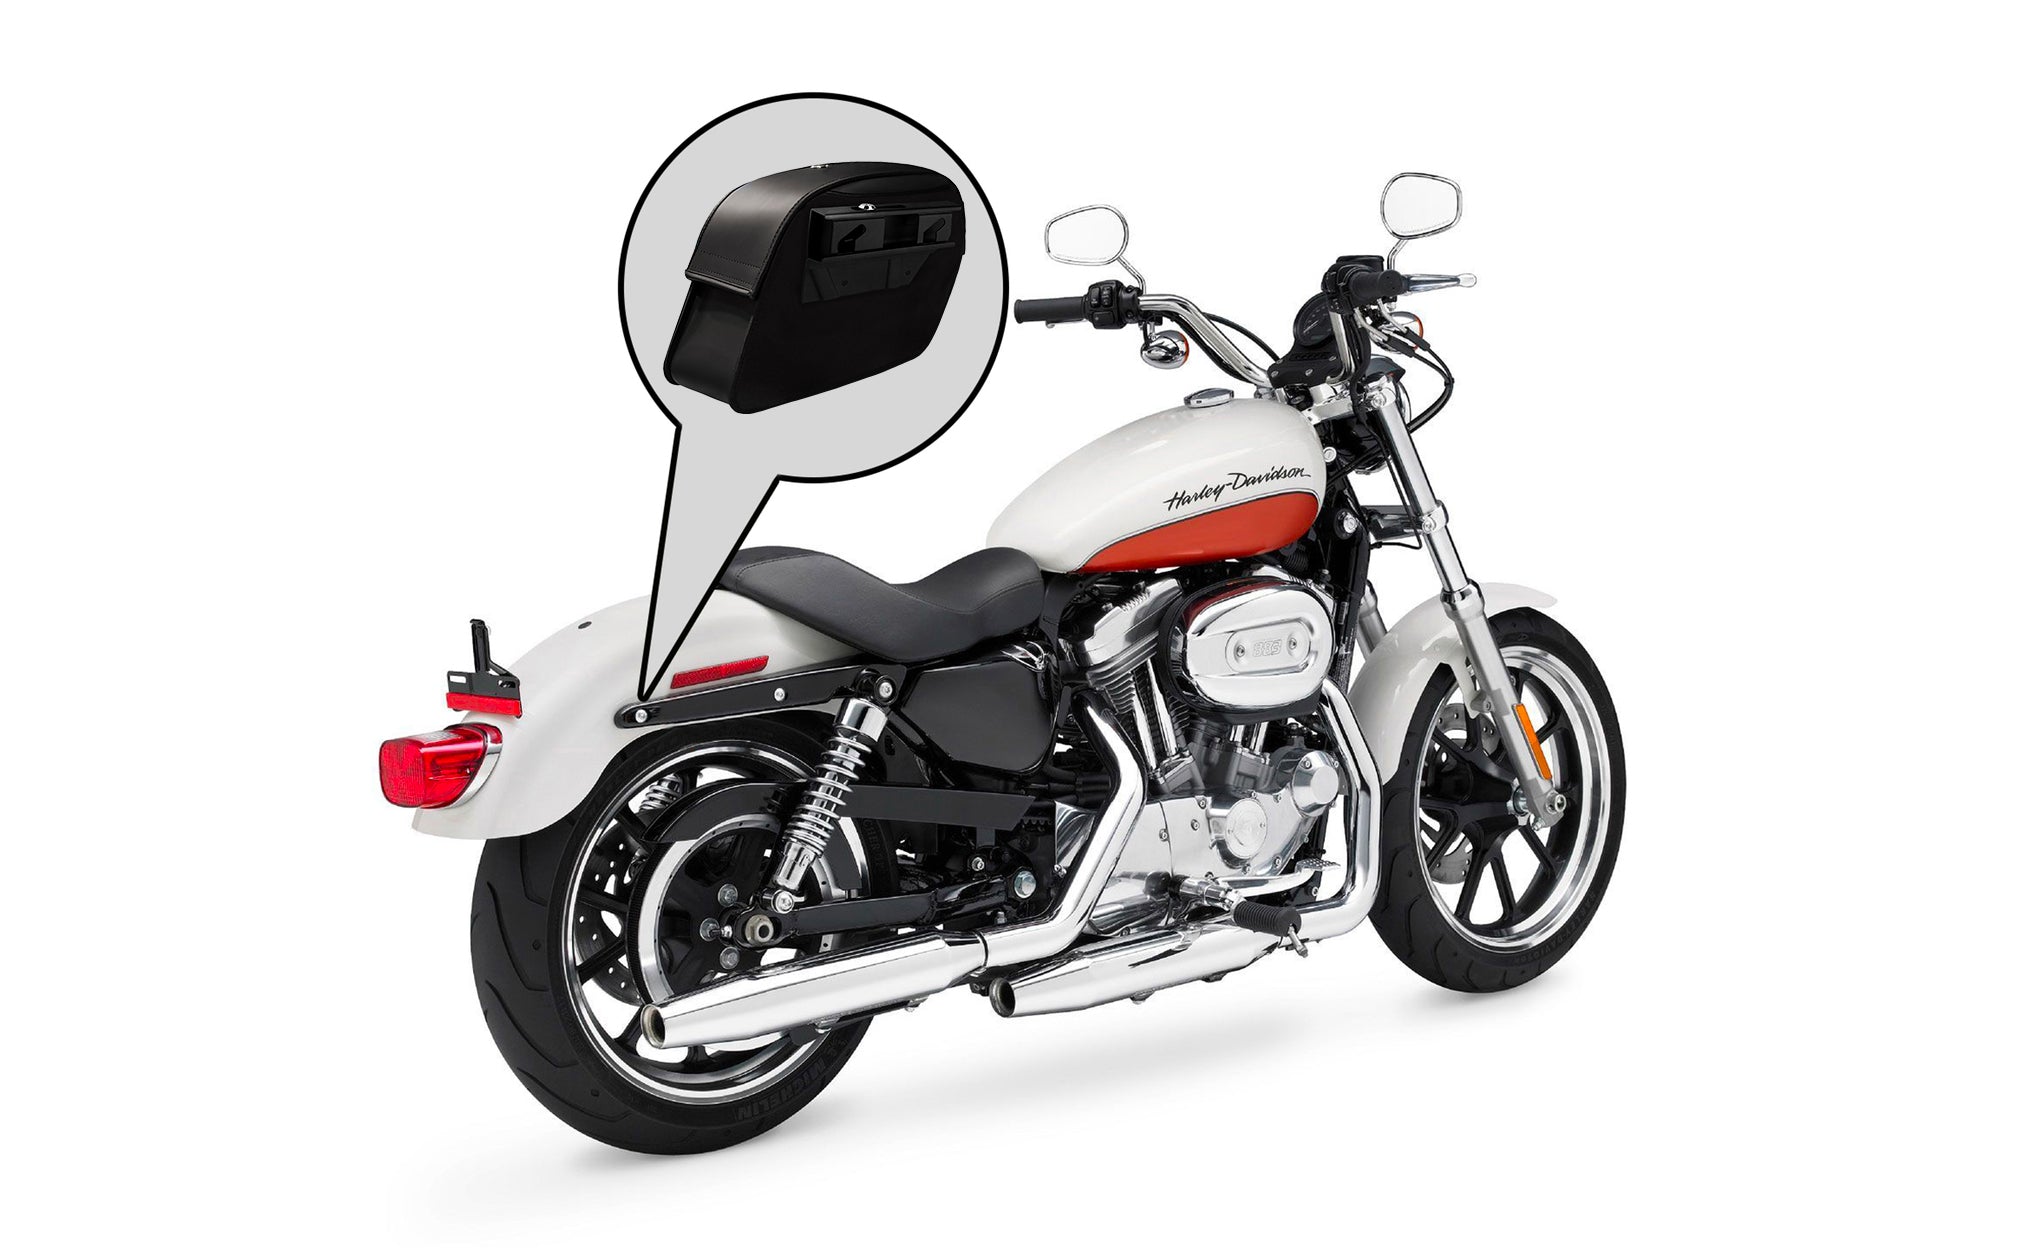 Viking Saddlebags Quick Disconnect System For Honda 1100 Shadow Spirit Bag on Bike View @expand